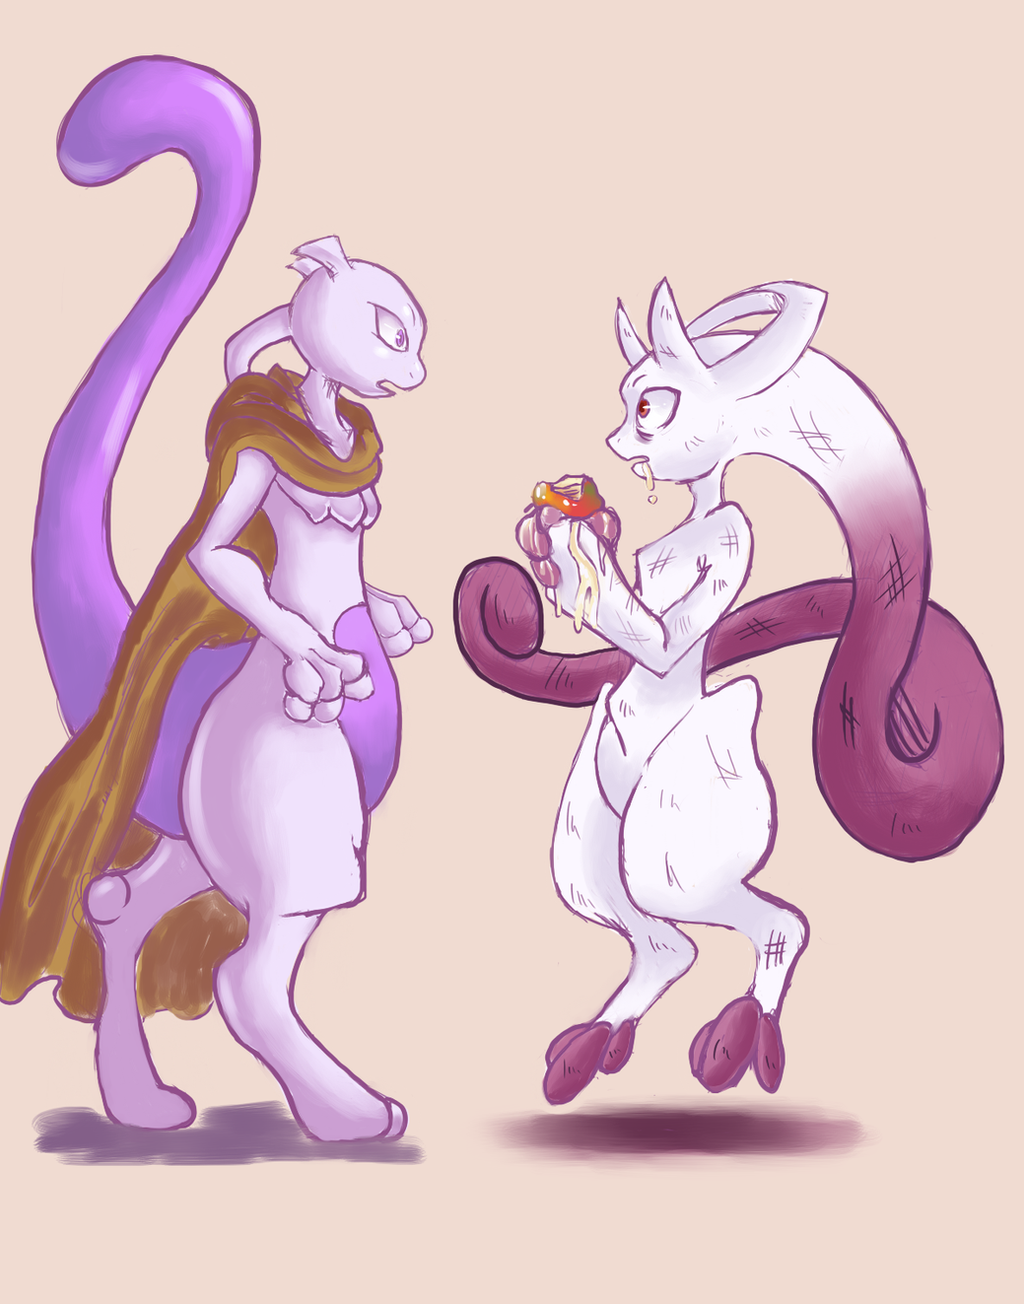 mewtwo_newtwo_by_dyw14-d60q34q.png